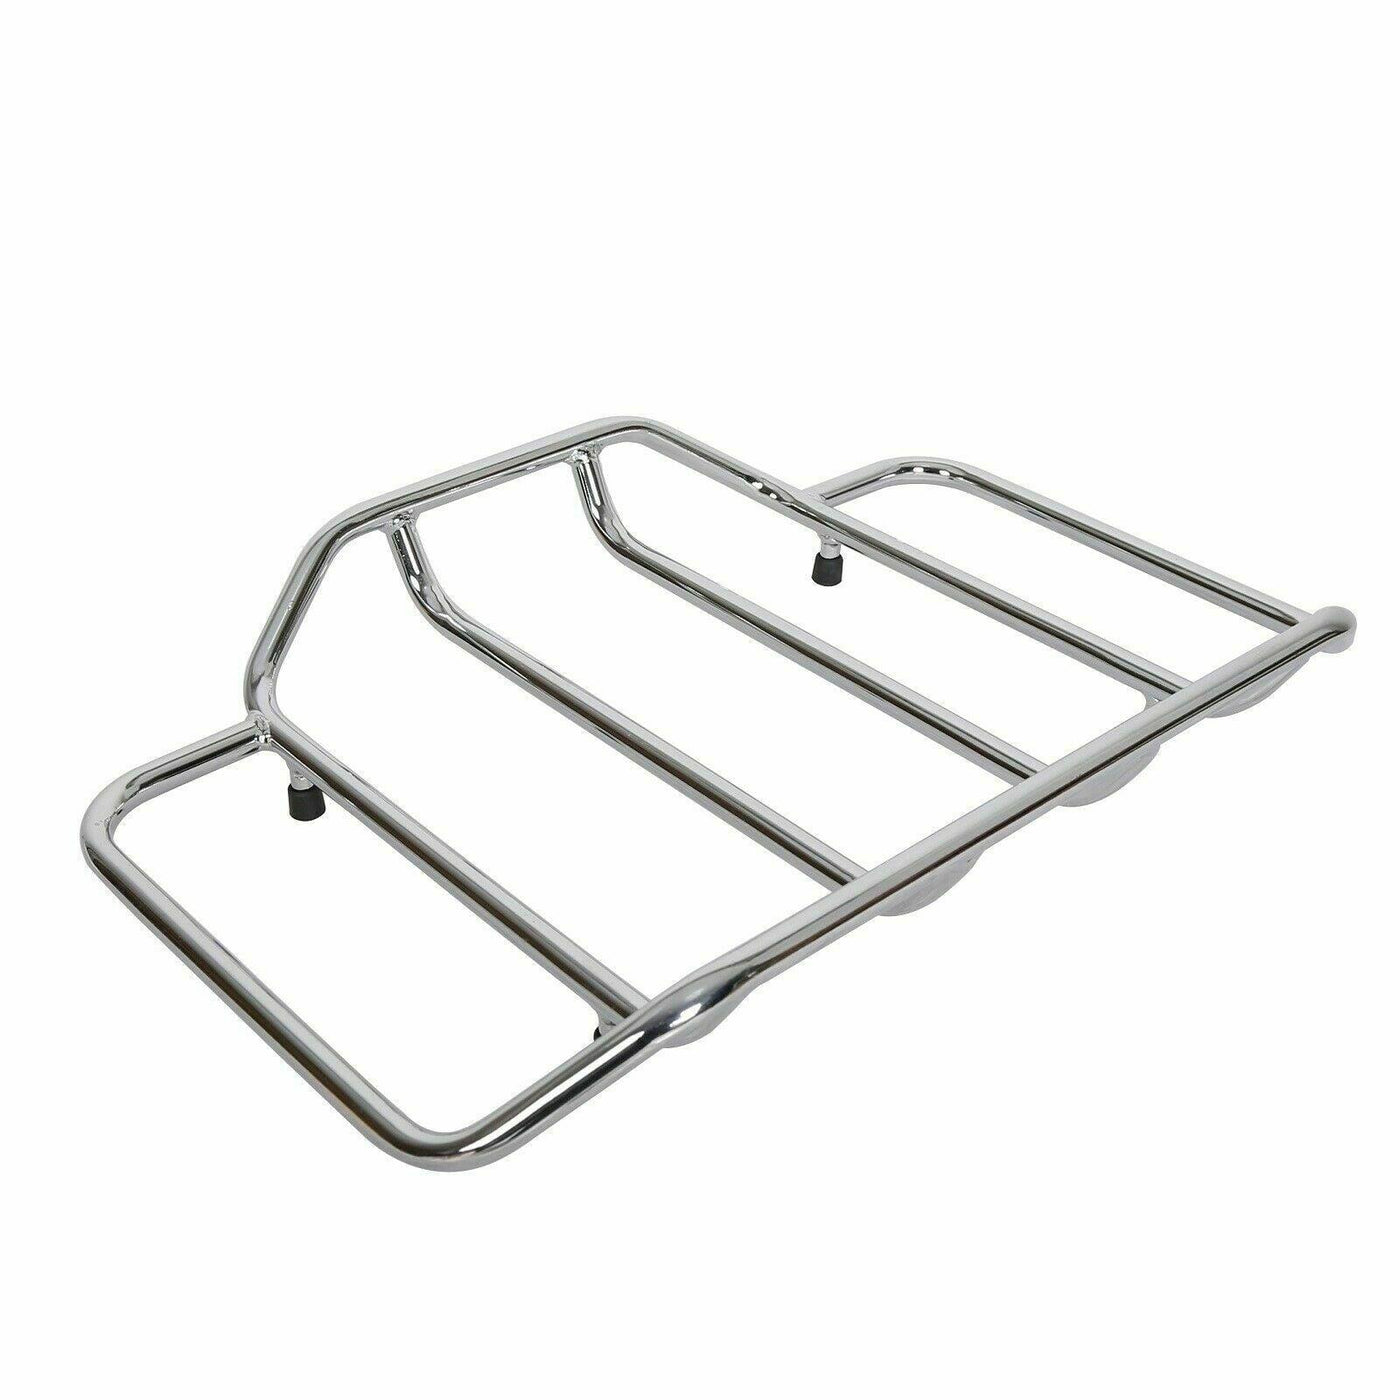 Chrome Tour Pack Pak Trunk Luggage Top Rack For Harley Road King Electra Glide - Moto Life Products